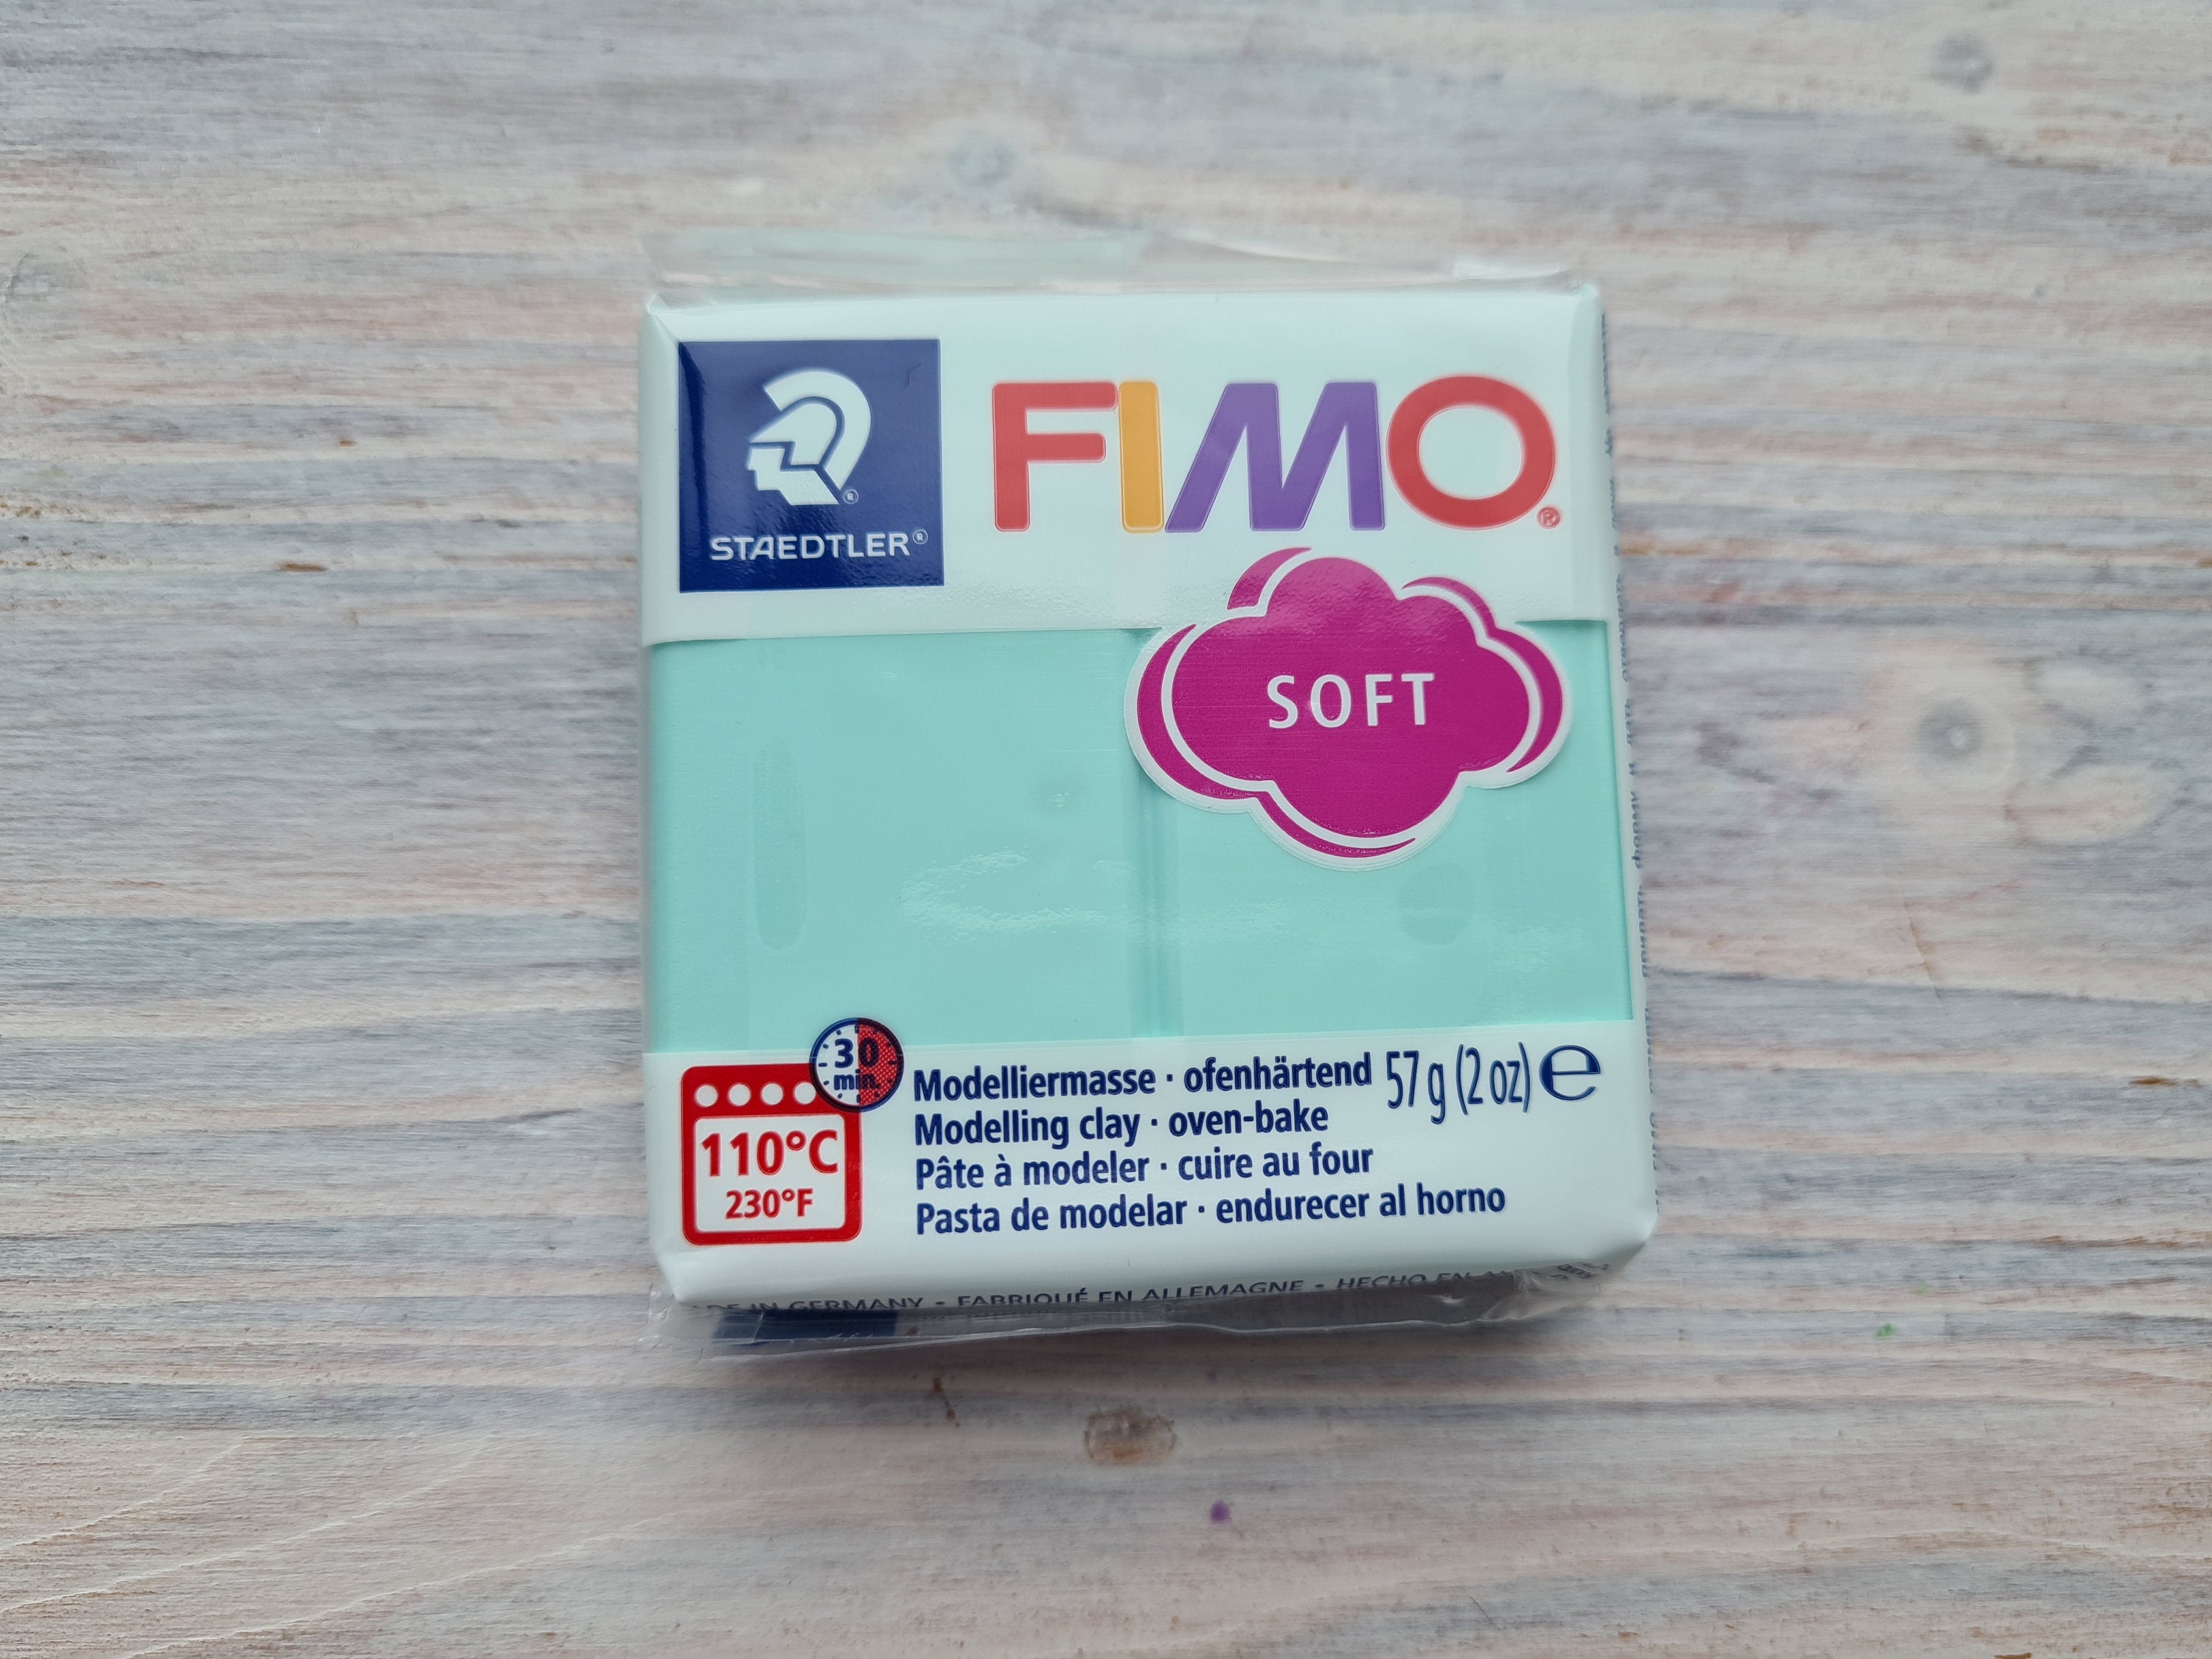 FIMO Soft Pastel Serie Polymer Clay, Mint pastel, Nr. 505, 57g 2oz,  Oven-hardening Polymer Modeling Clay, Pastel Colors by STAEDTLER 